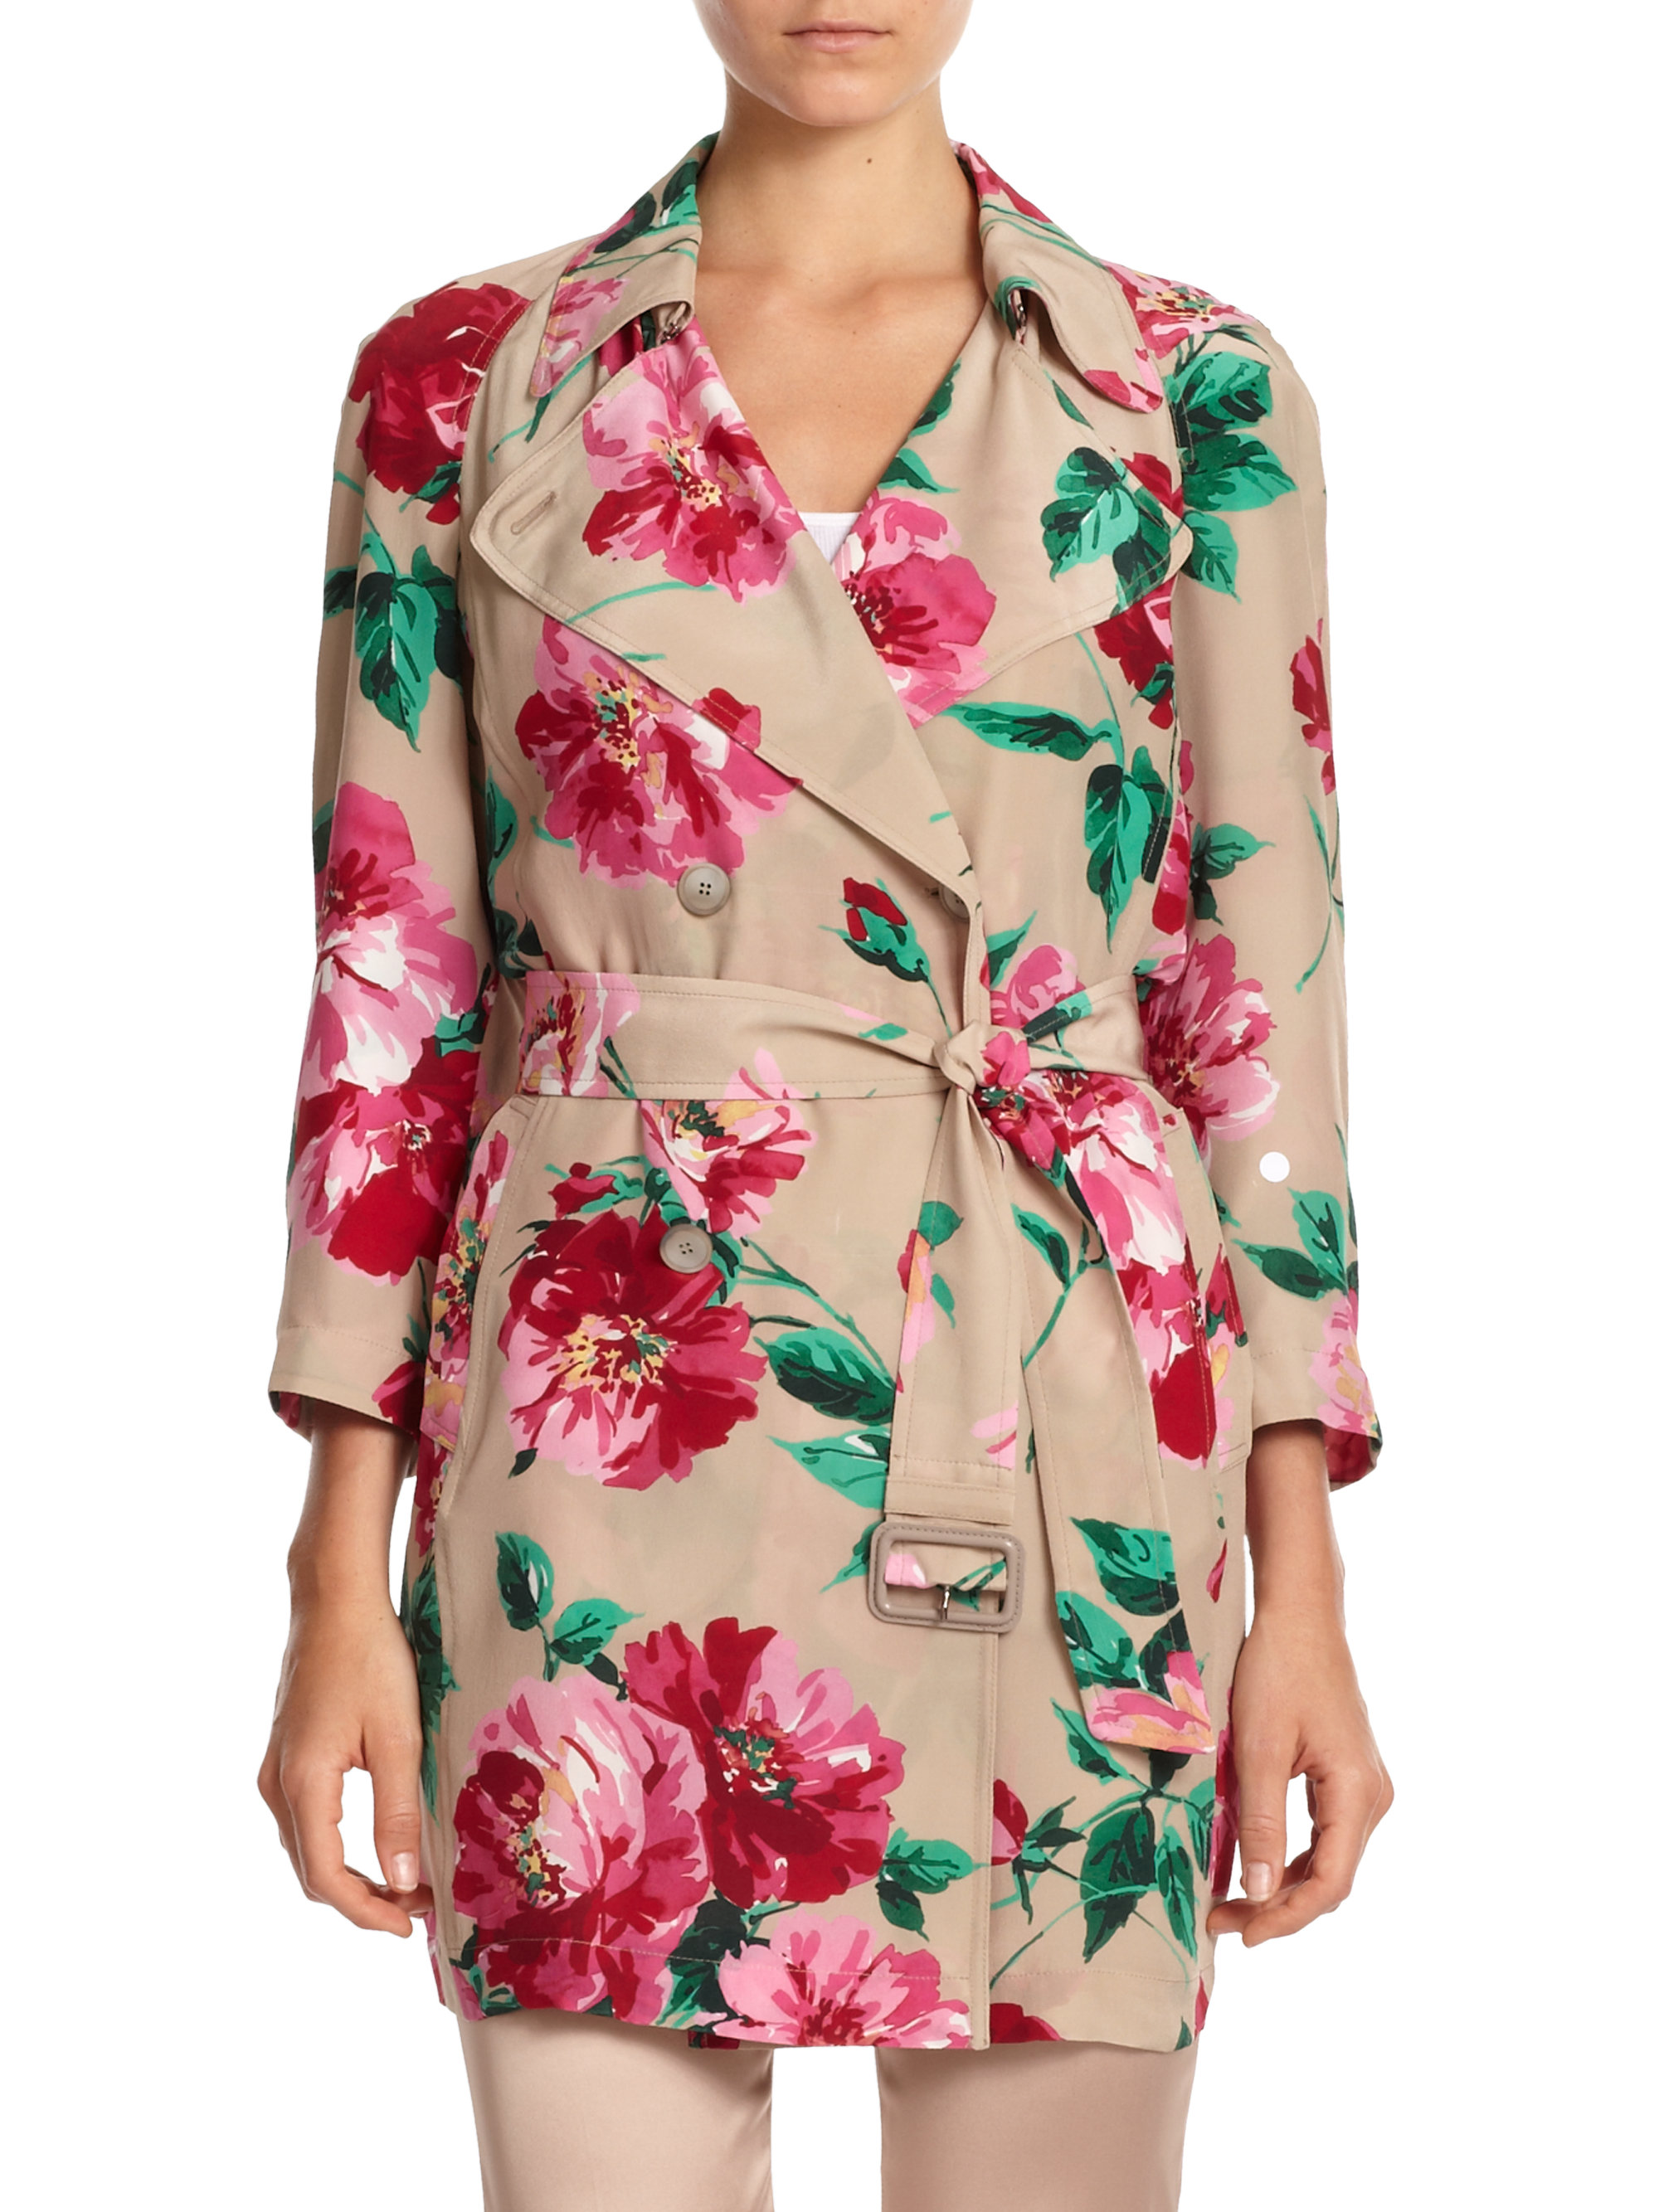 Dolce & Gabbana Floral Print Silk Trench Coat in Floral (BEIGE FLORAL